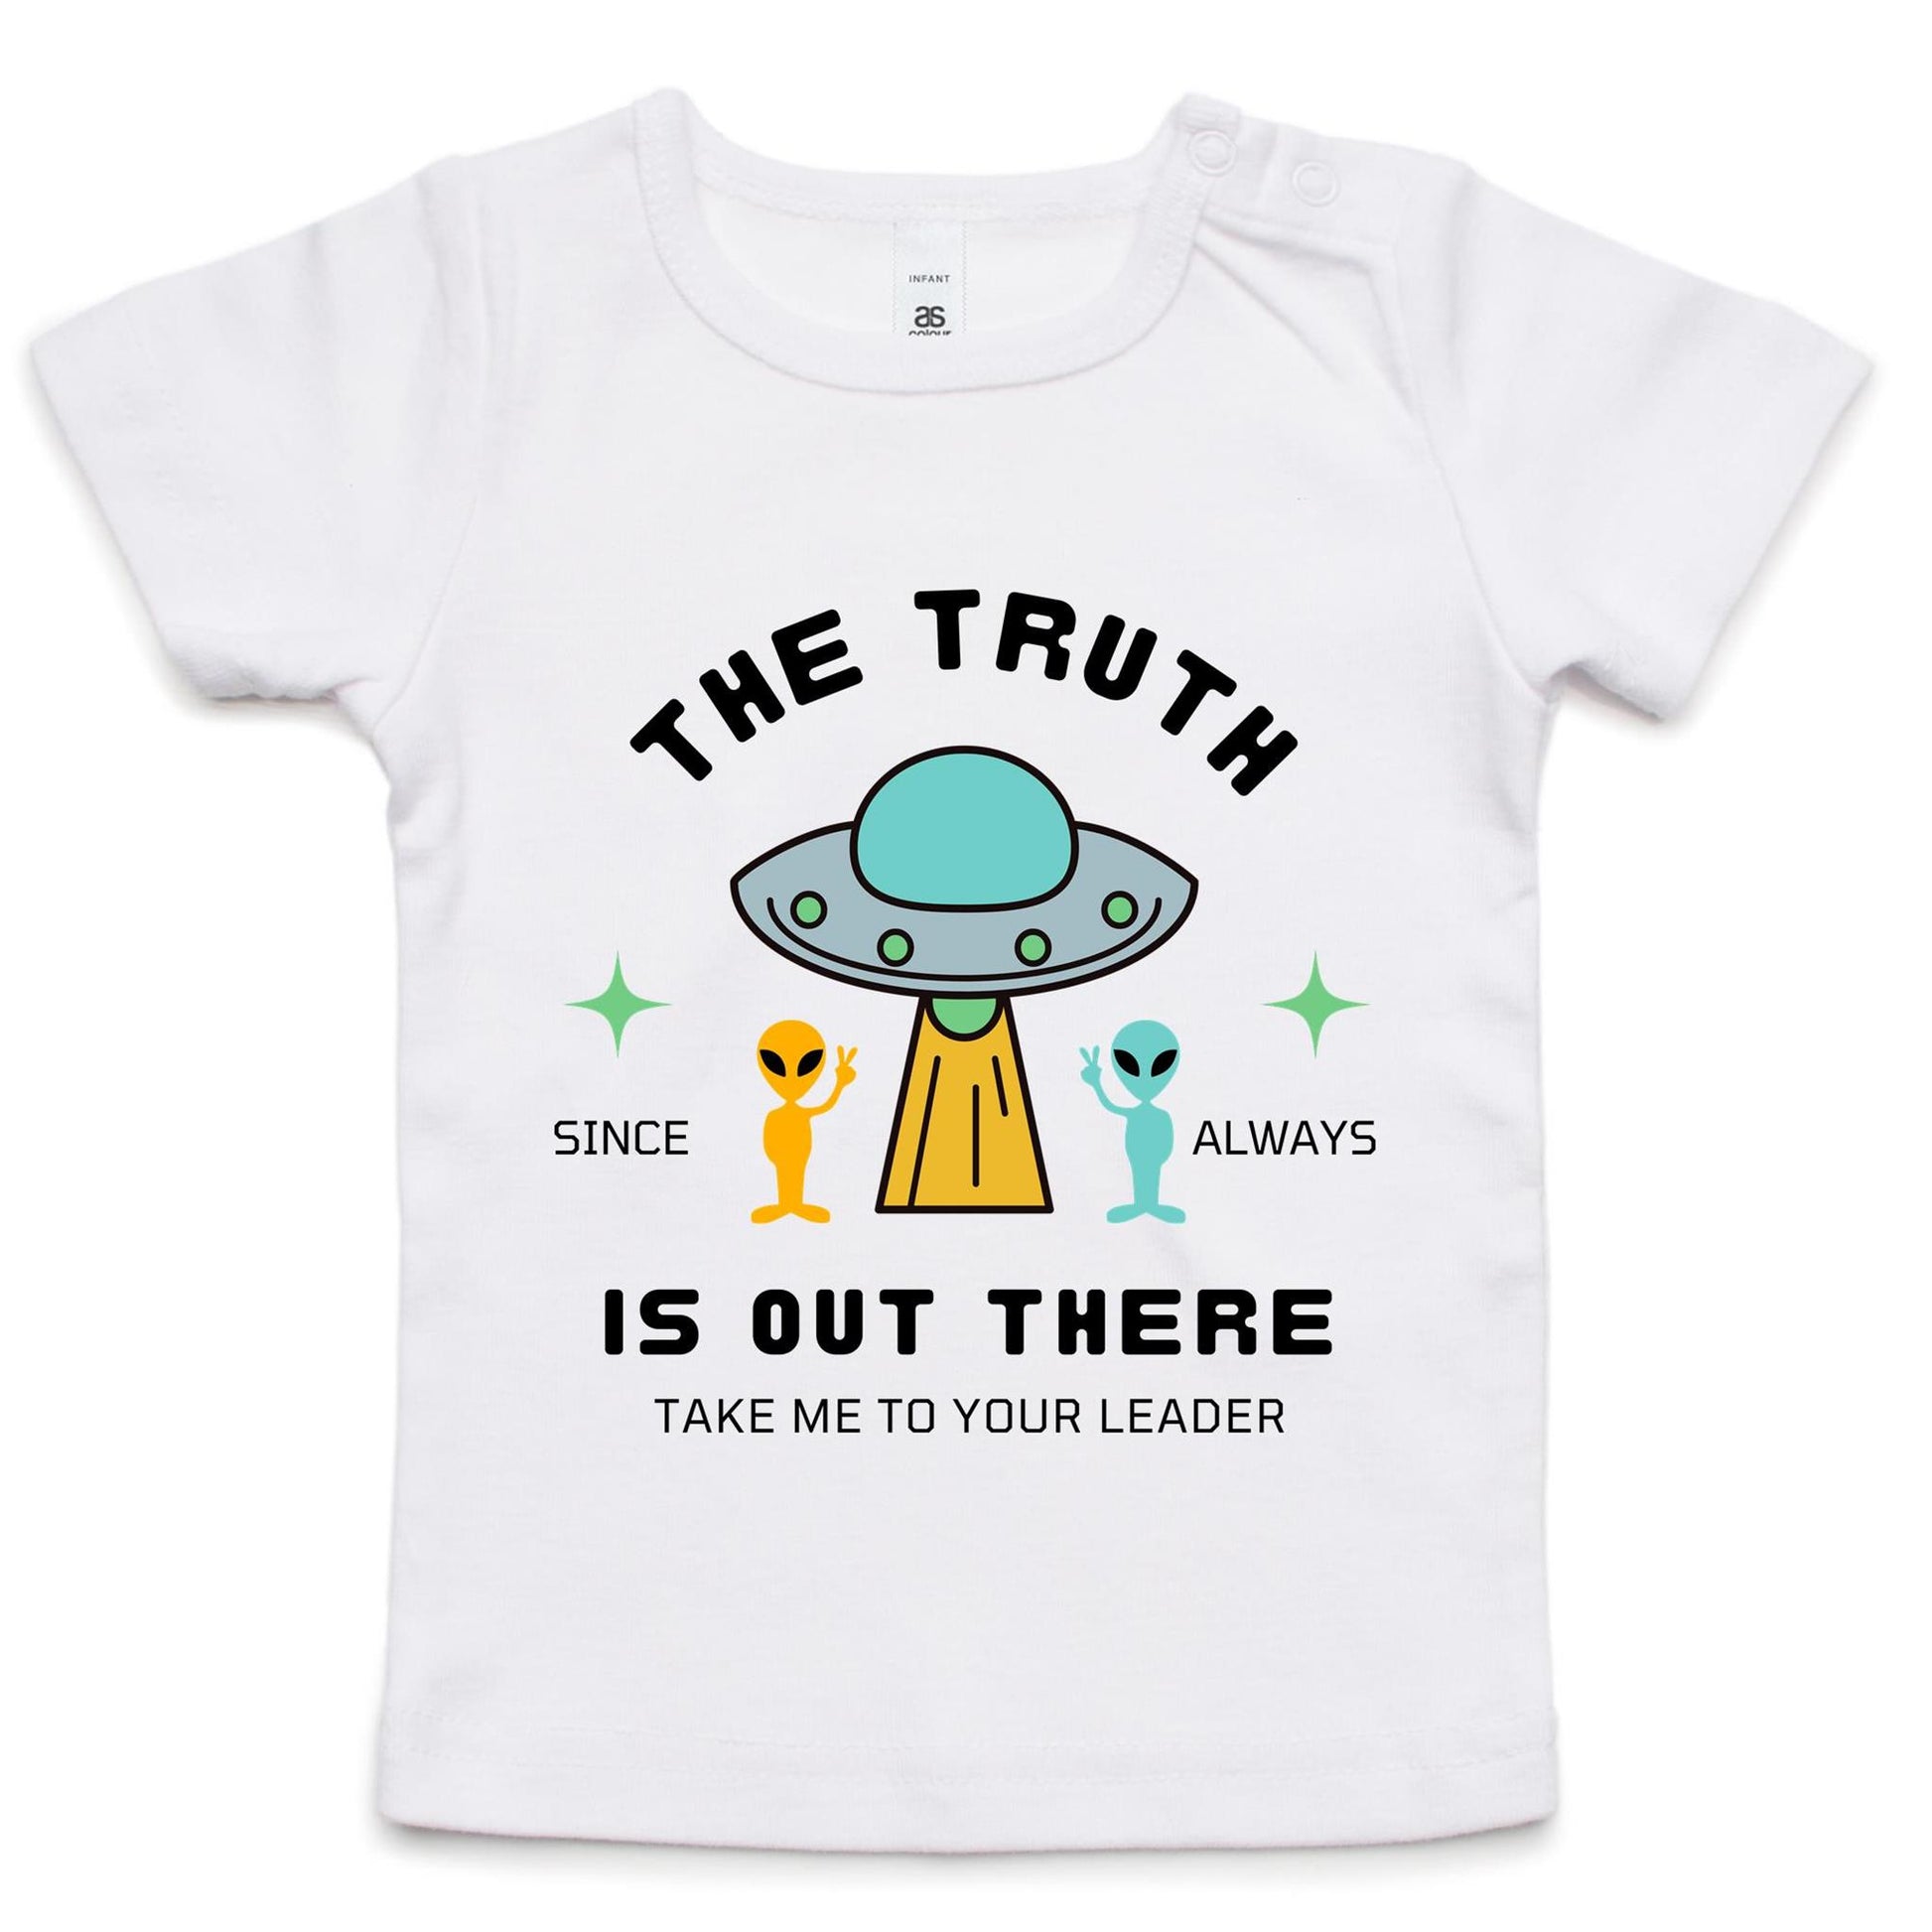 The Truth Is Out There - Baby T-shirt White Baby T-shirt Sci Fi